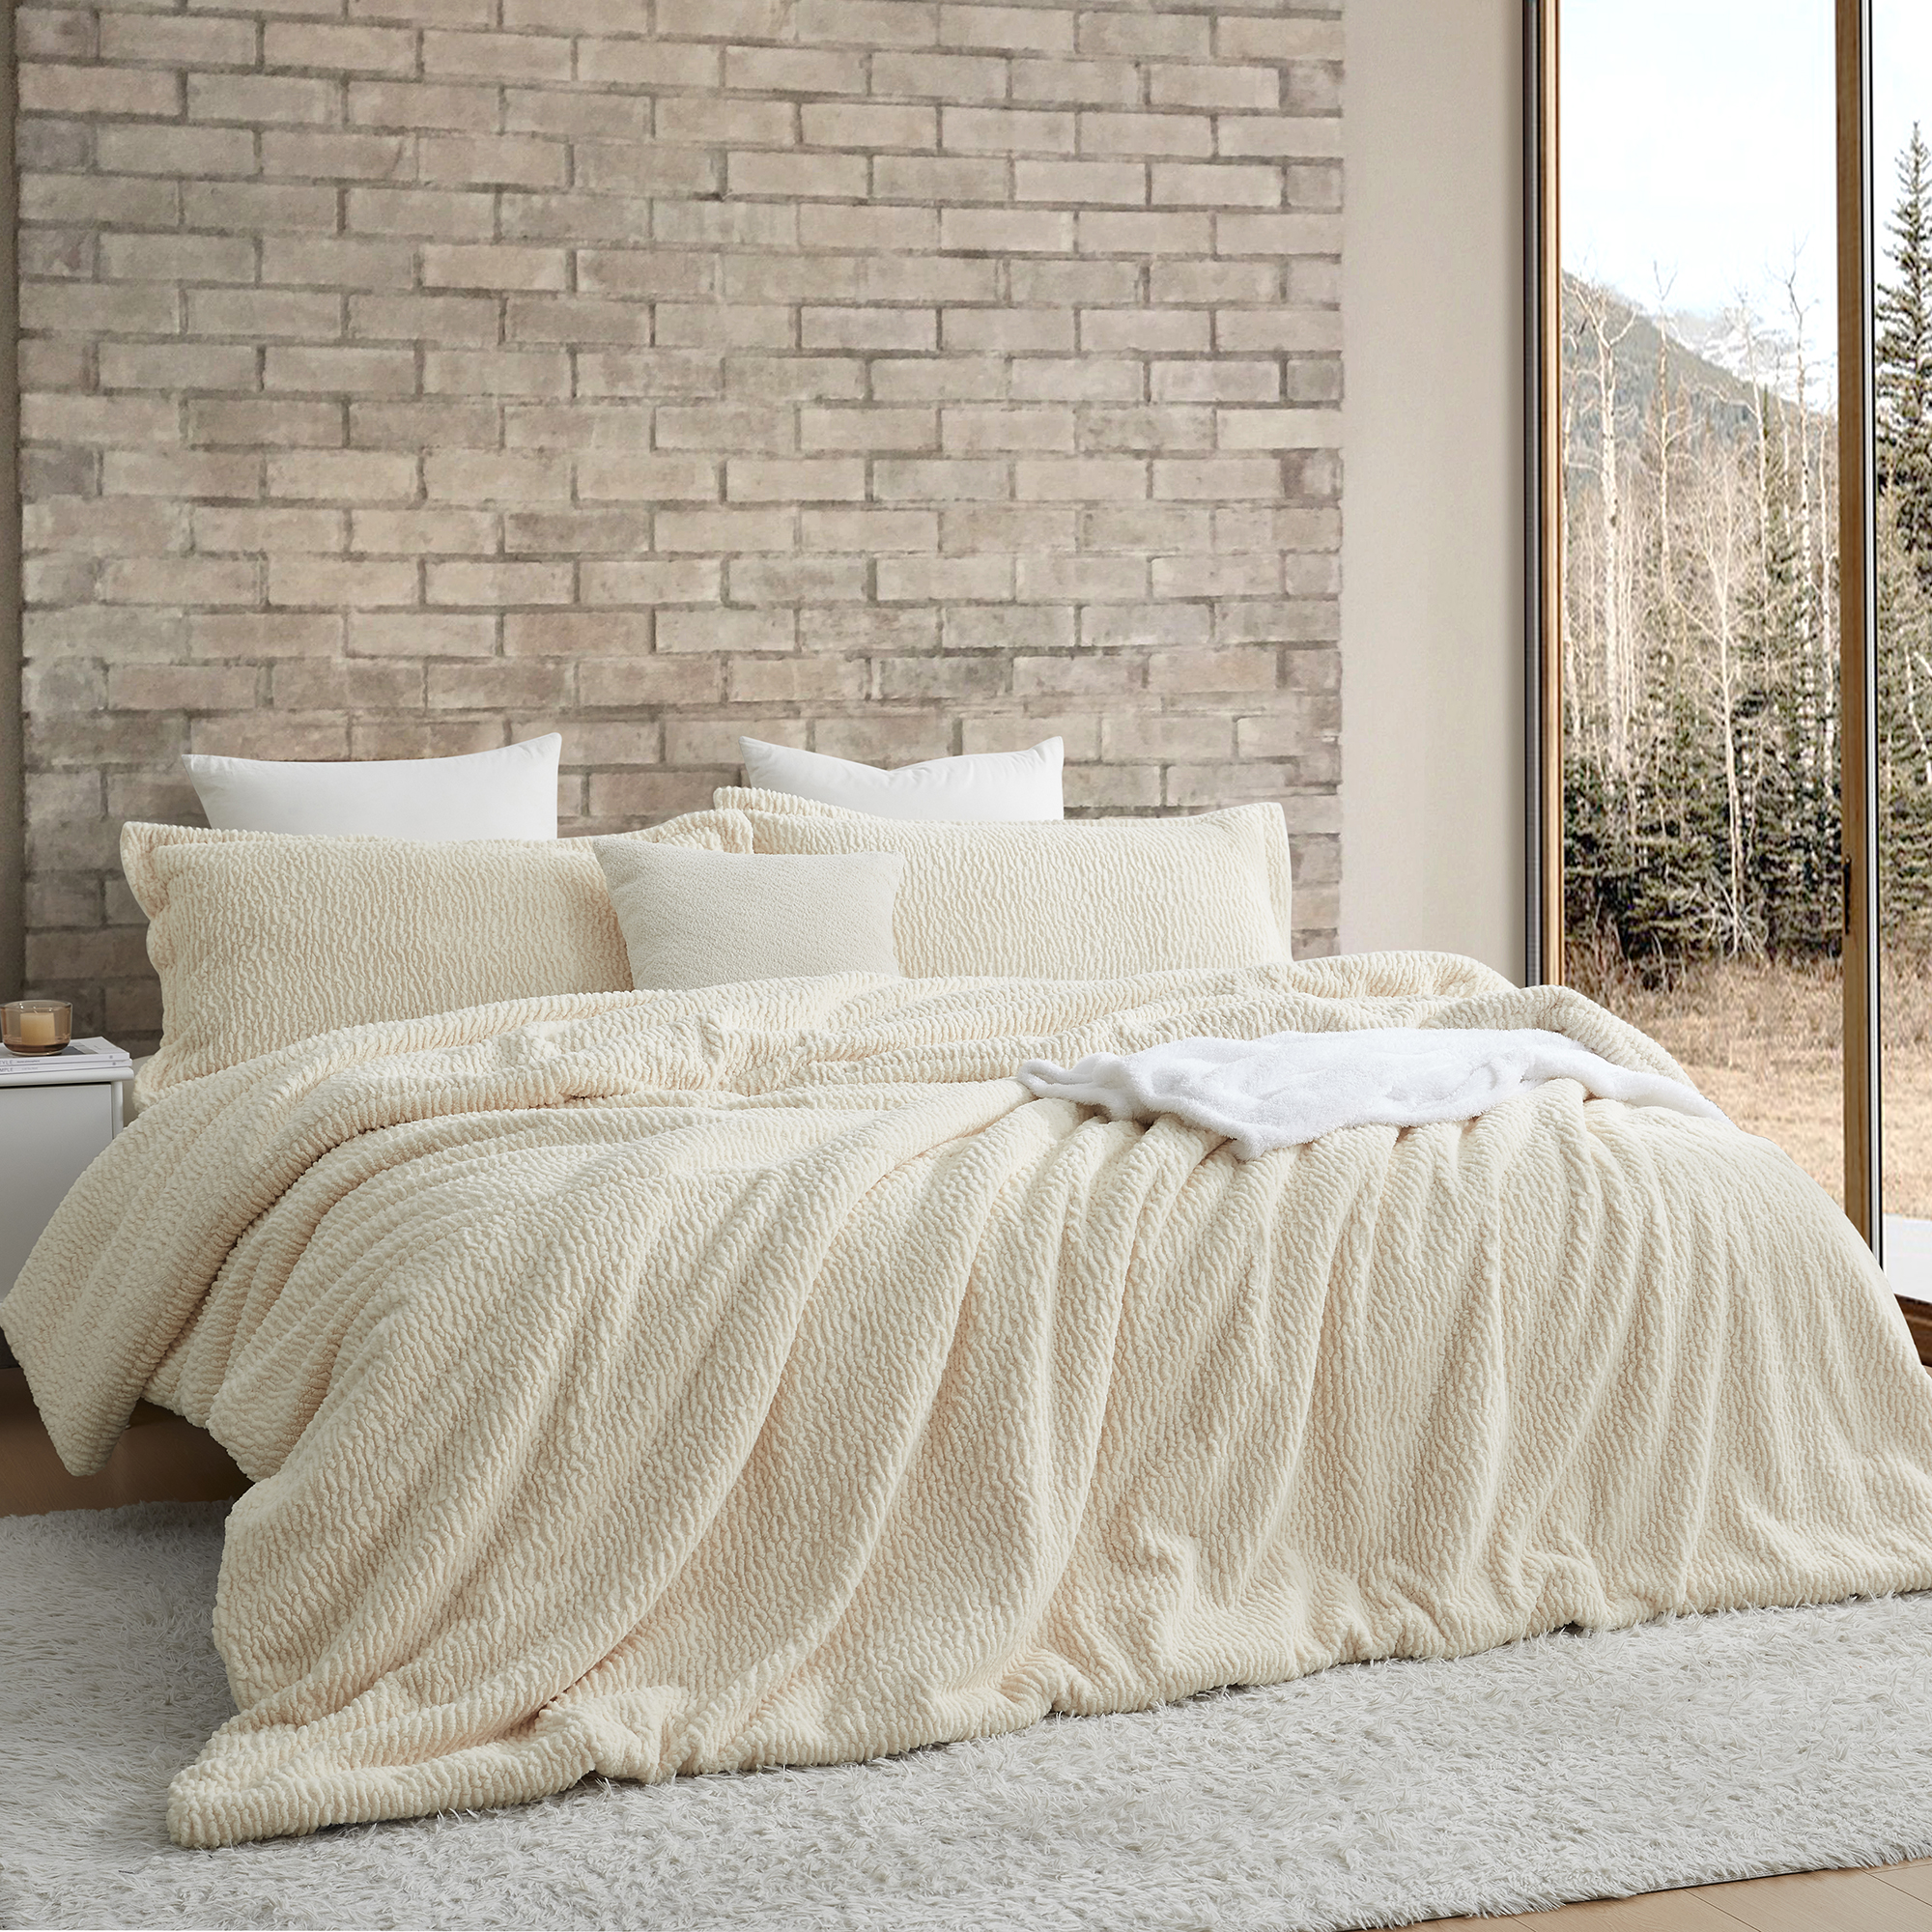 Cloud Cover - Coma Inducer® Oversized Comforter - Creamy Taupe